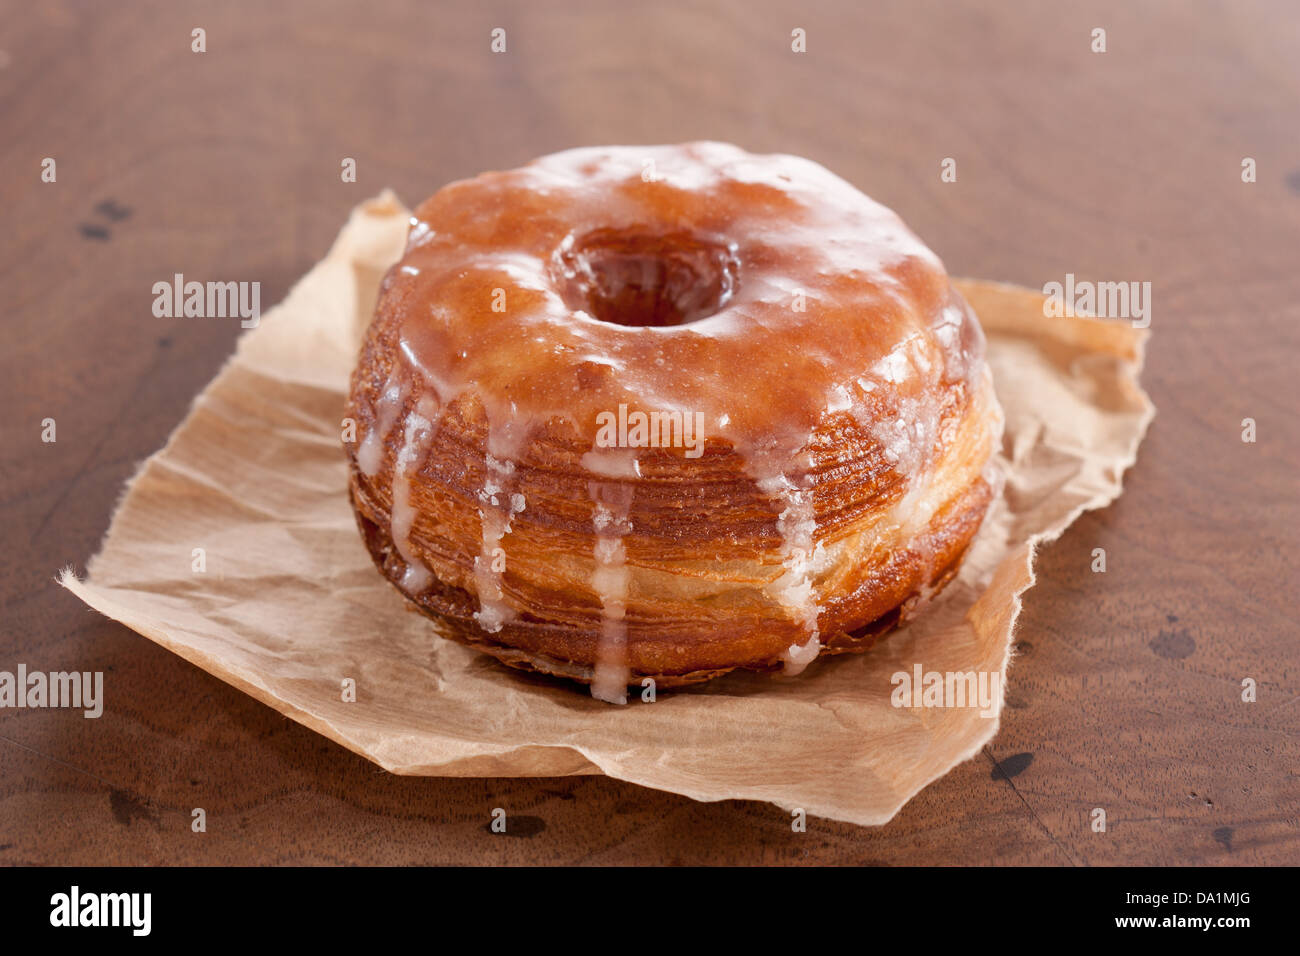 Original croissant and doughnut mixture on a wooden table Stock Photo